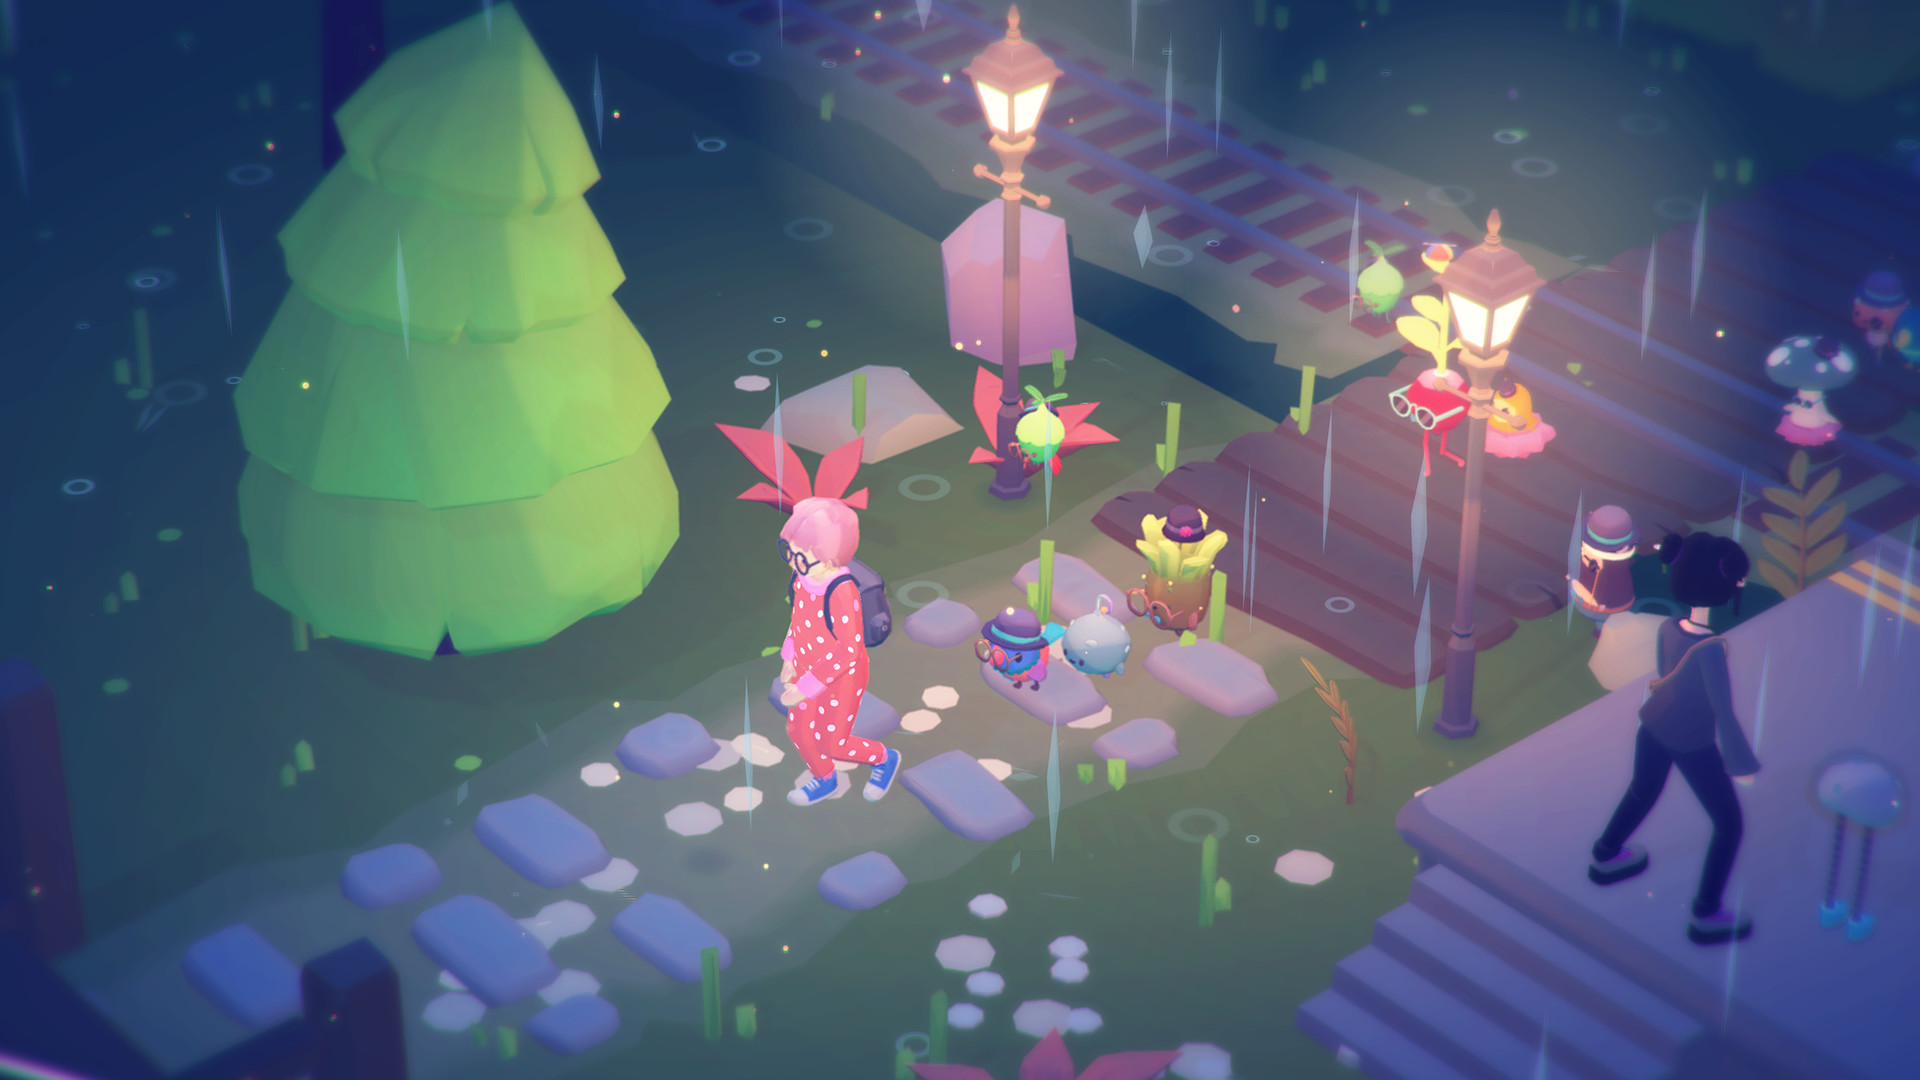 Ooblets Free Download